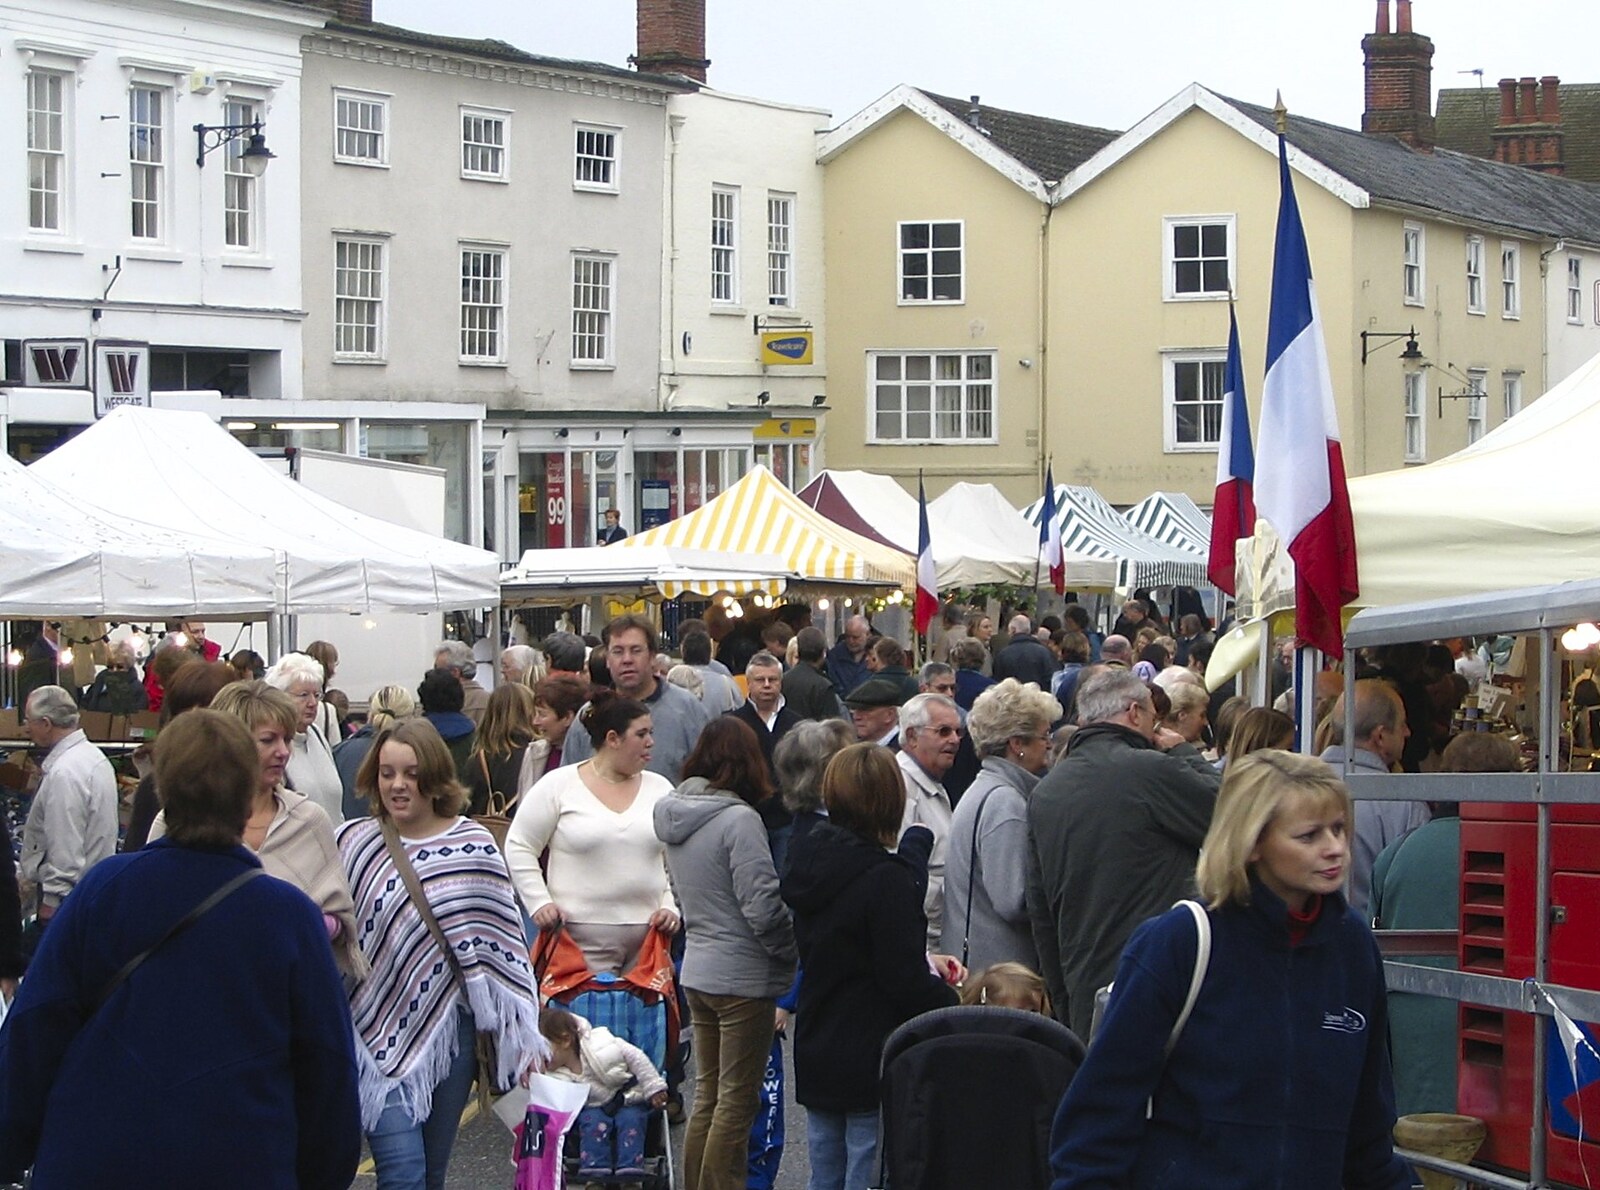 The crowds are out on Diss Marketplace from A French Market, Blues and Curry, Diss, Scole and Brome - 17th October 2004